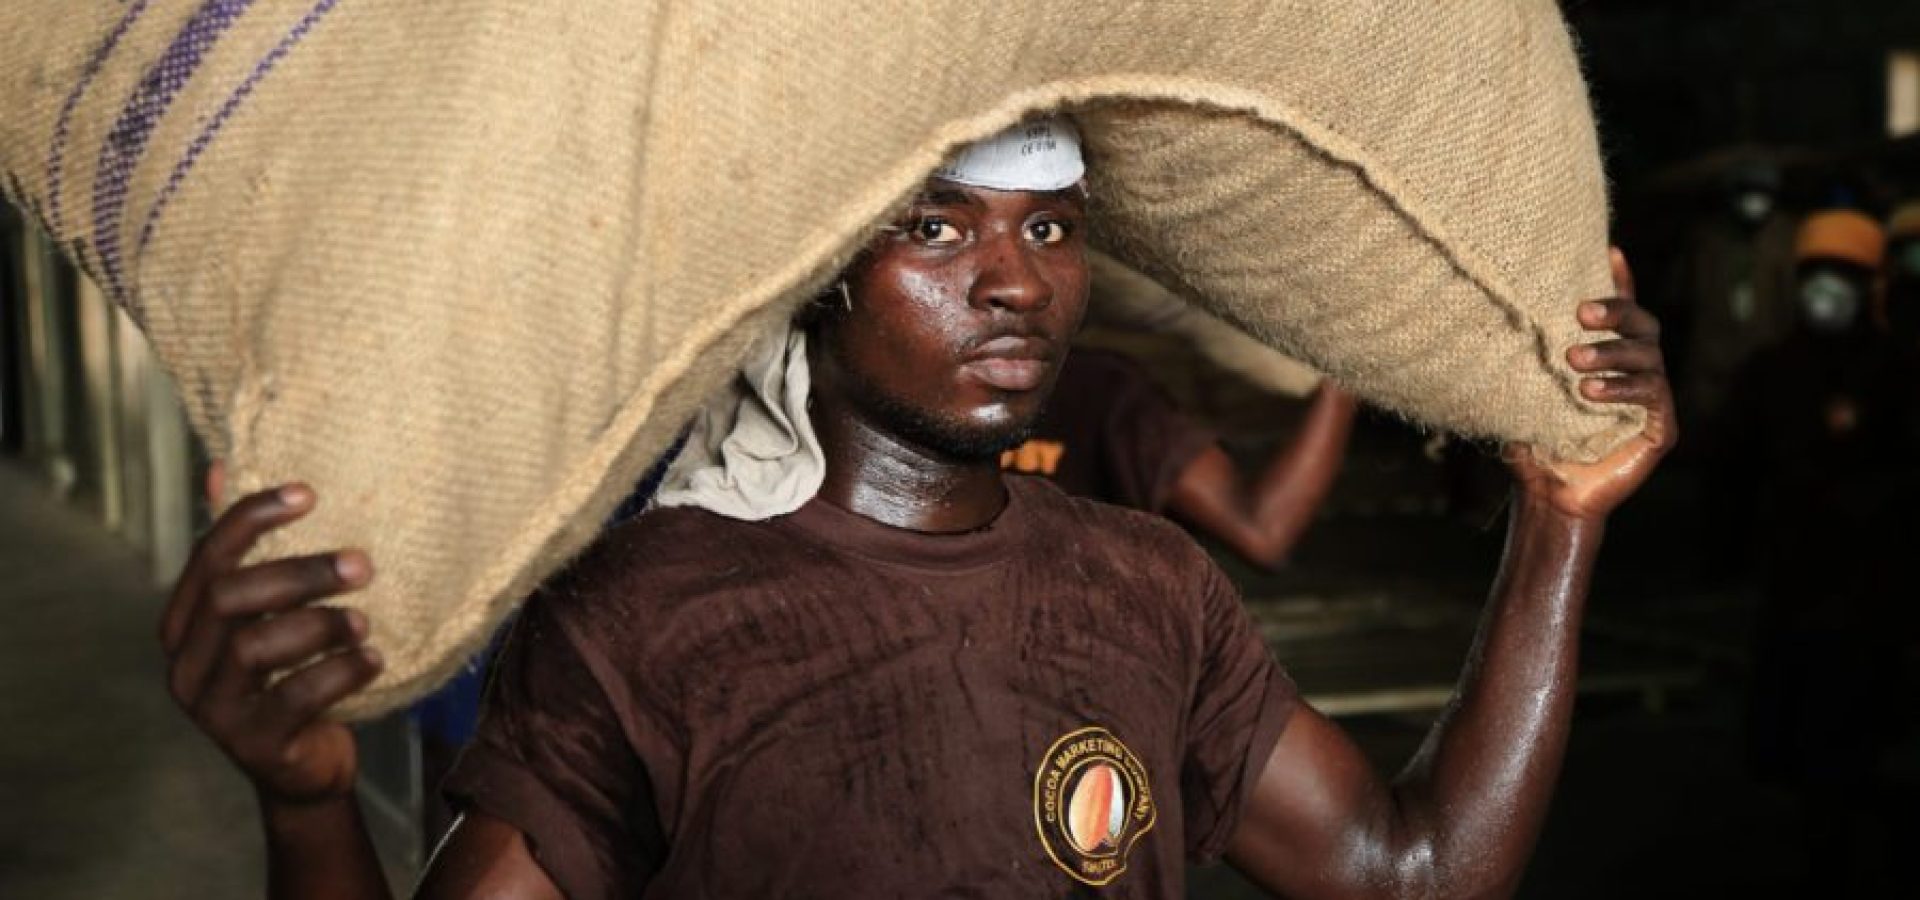 African cocoa laborers earn less than a dollar a day